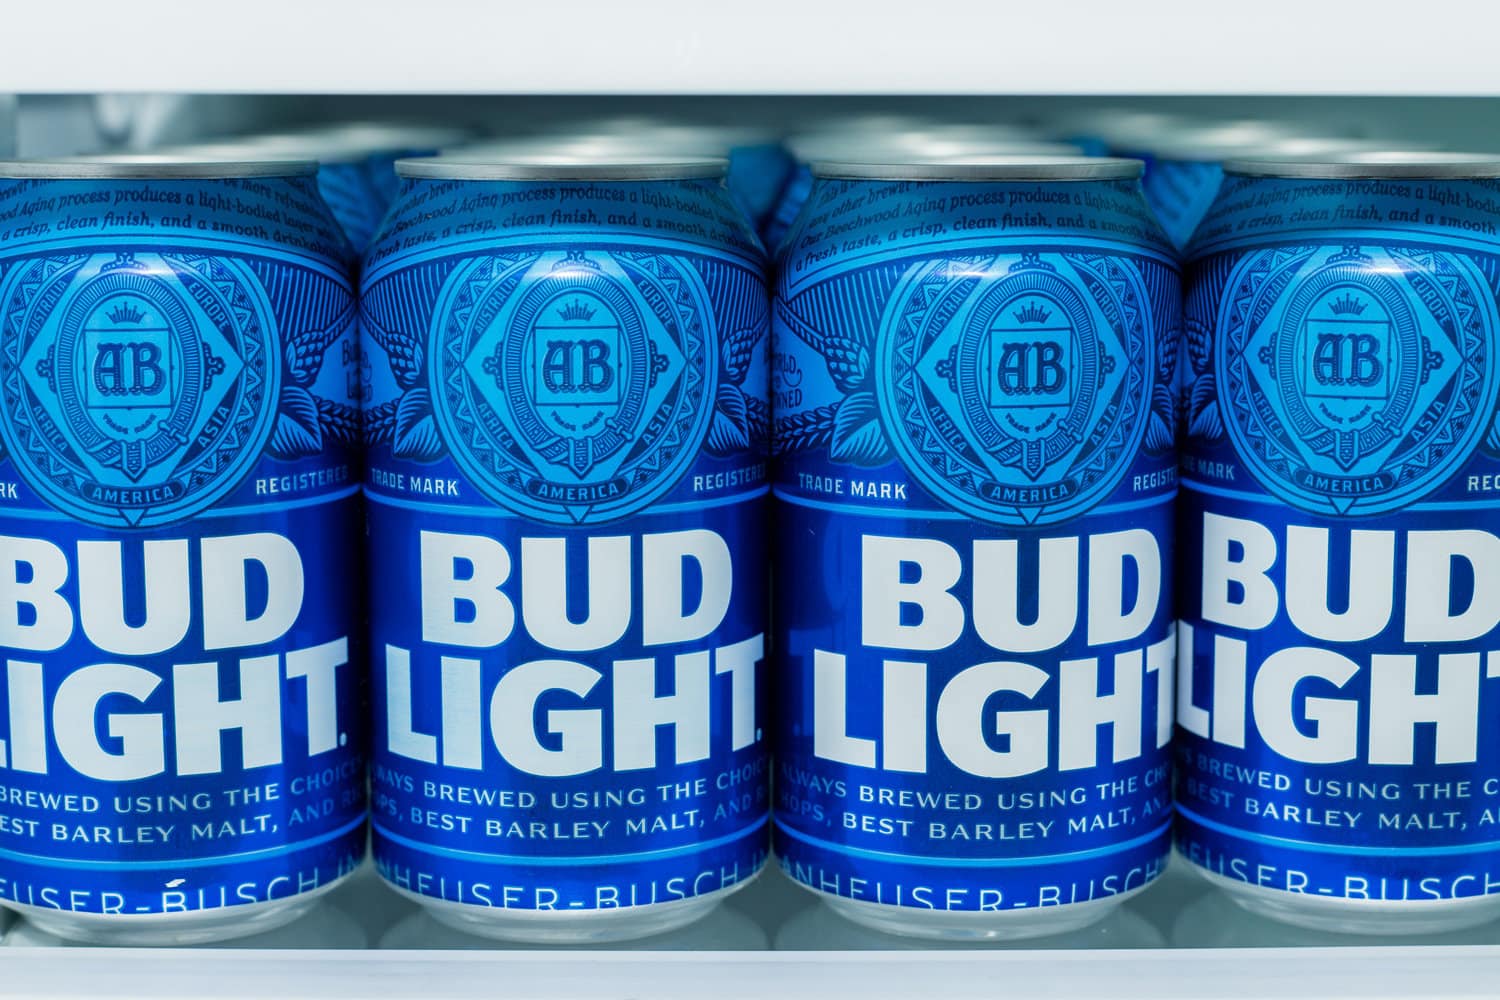  Cans of Bud Light Beer lined up on a shelf in a refrigerator.